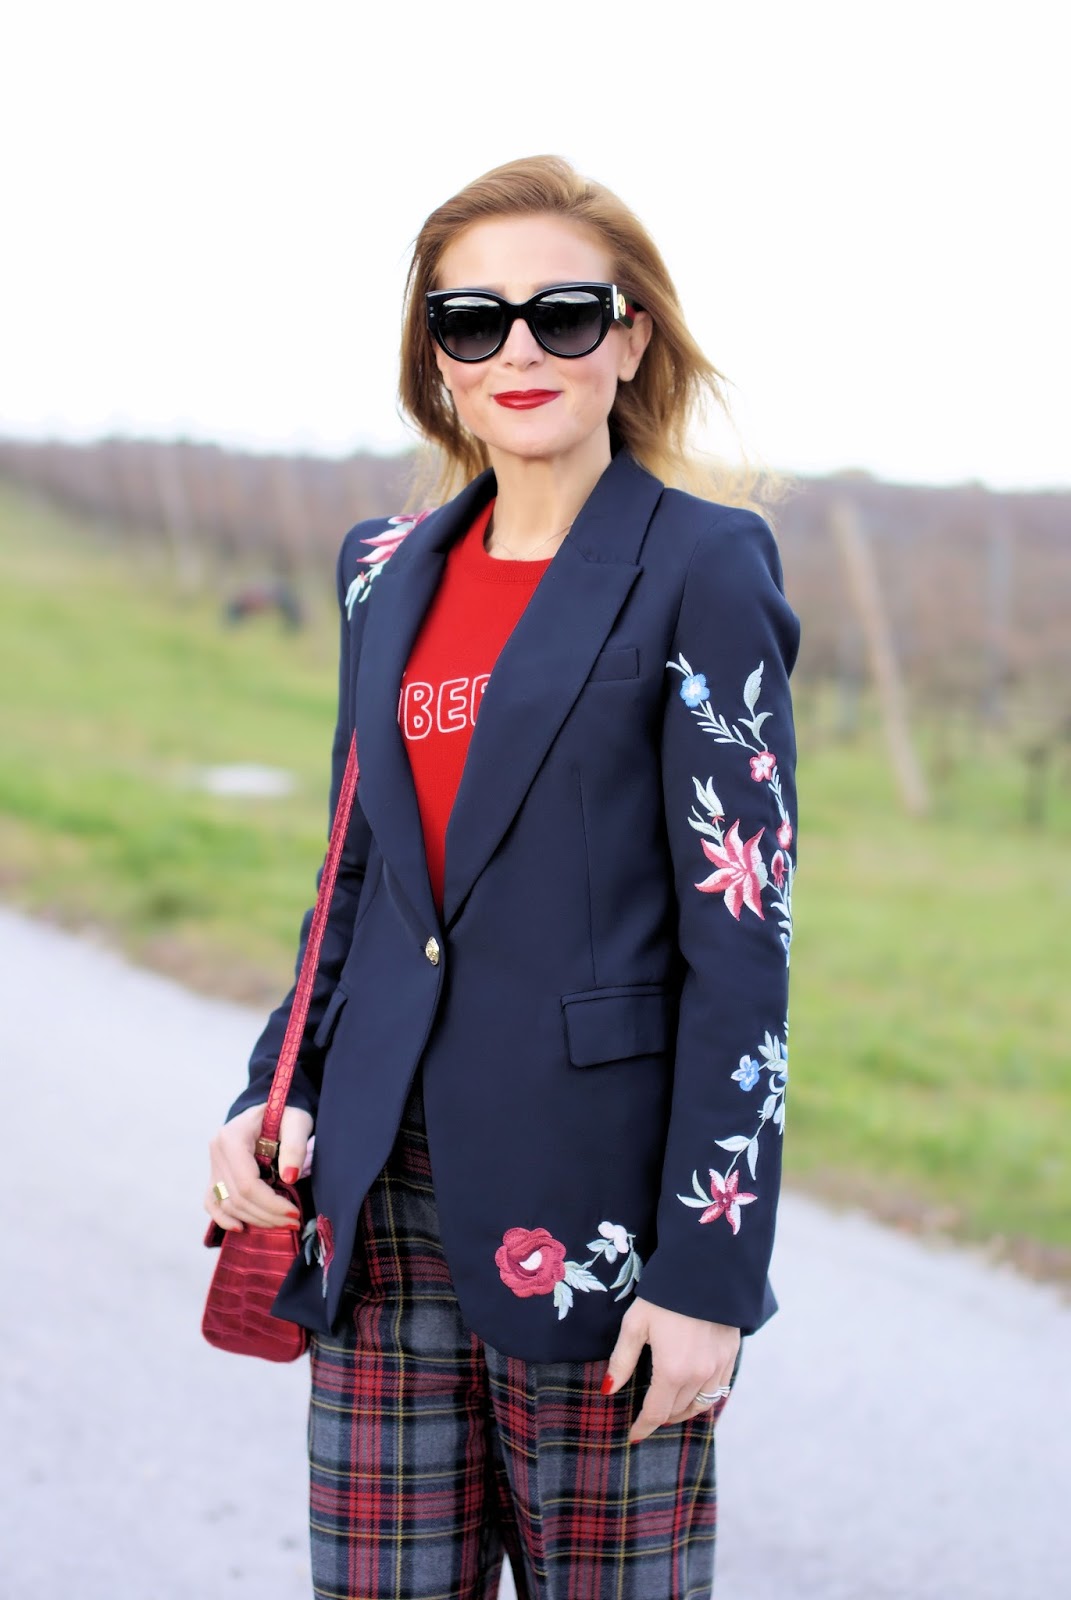 Zaful embroidered blazer and plaid pants on Fashion and Cookies fashion blog, fashion blogger style